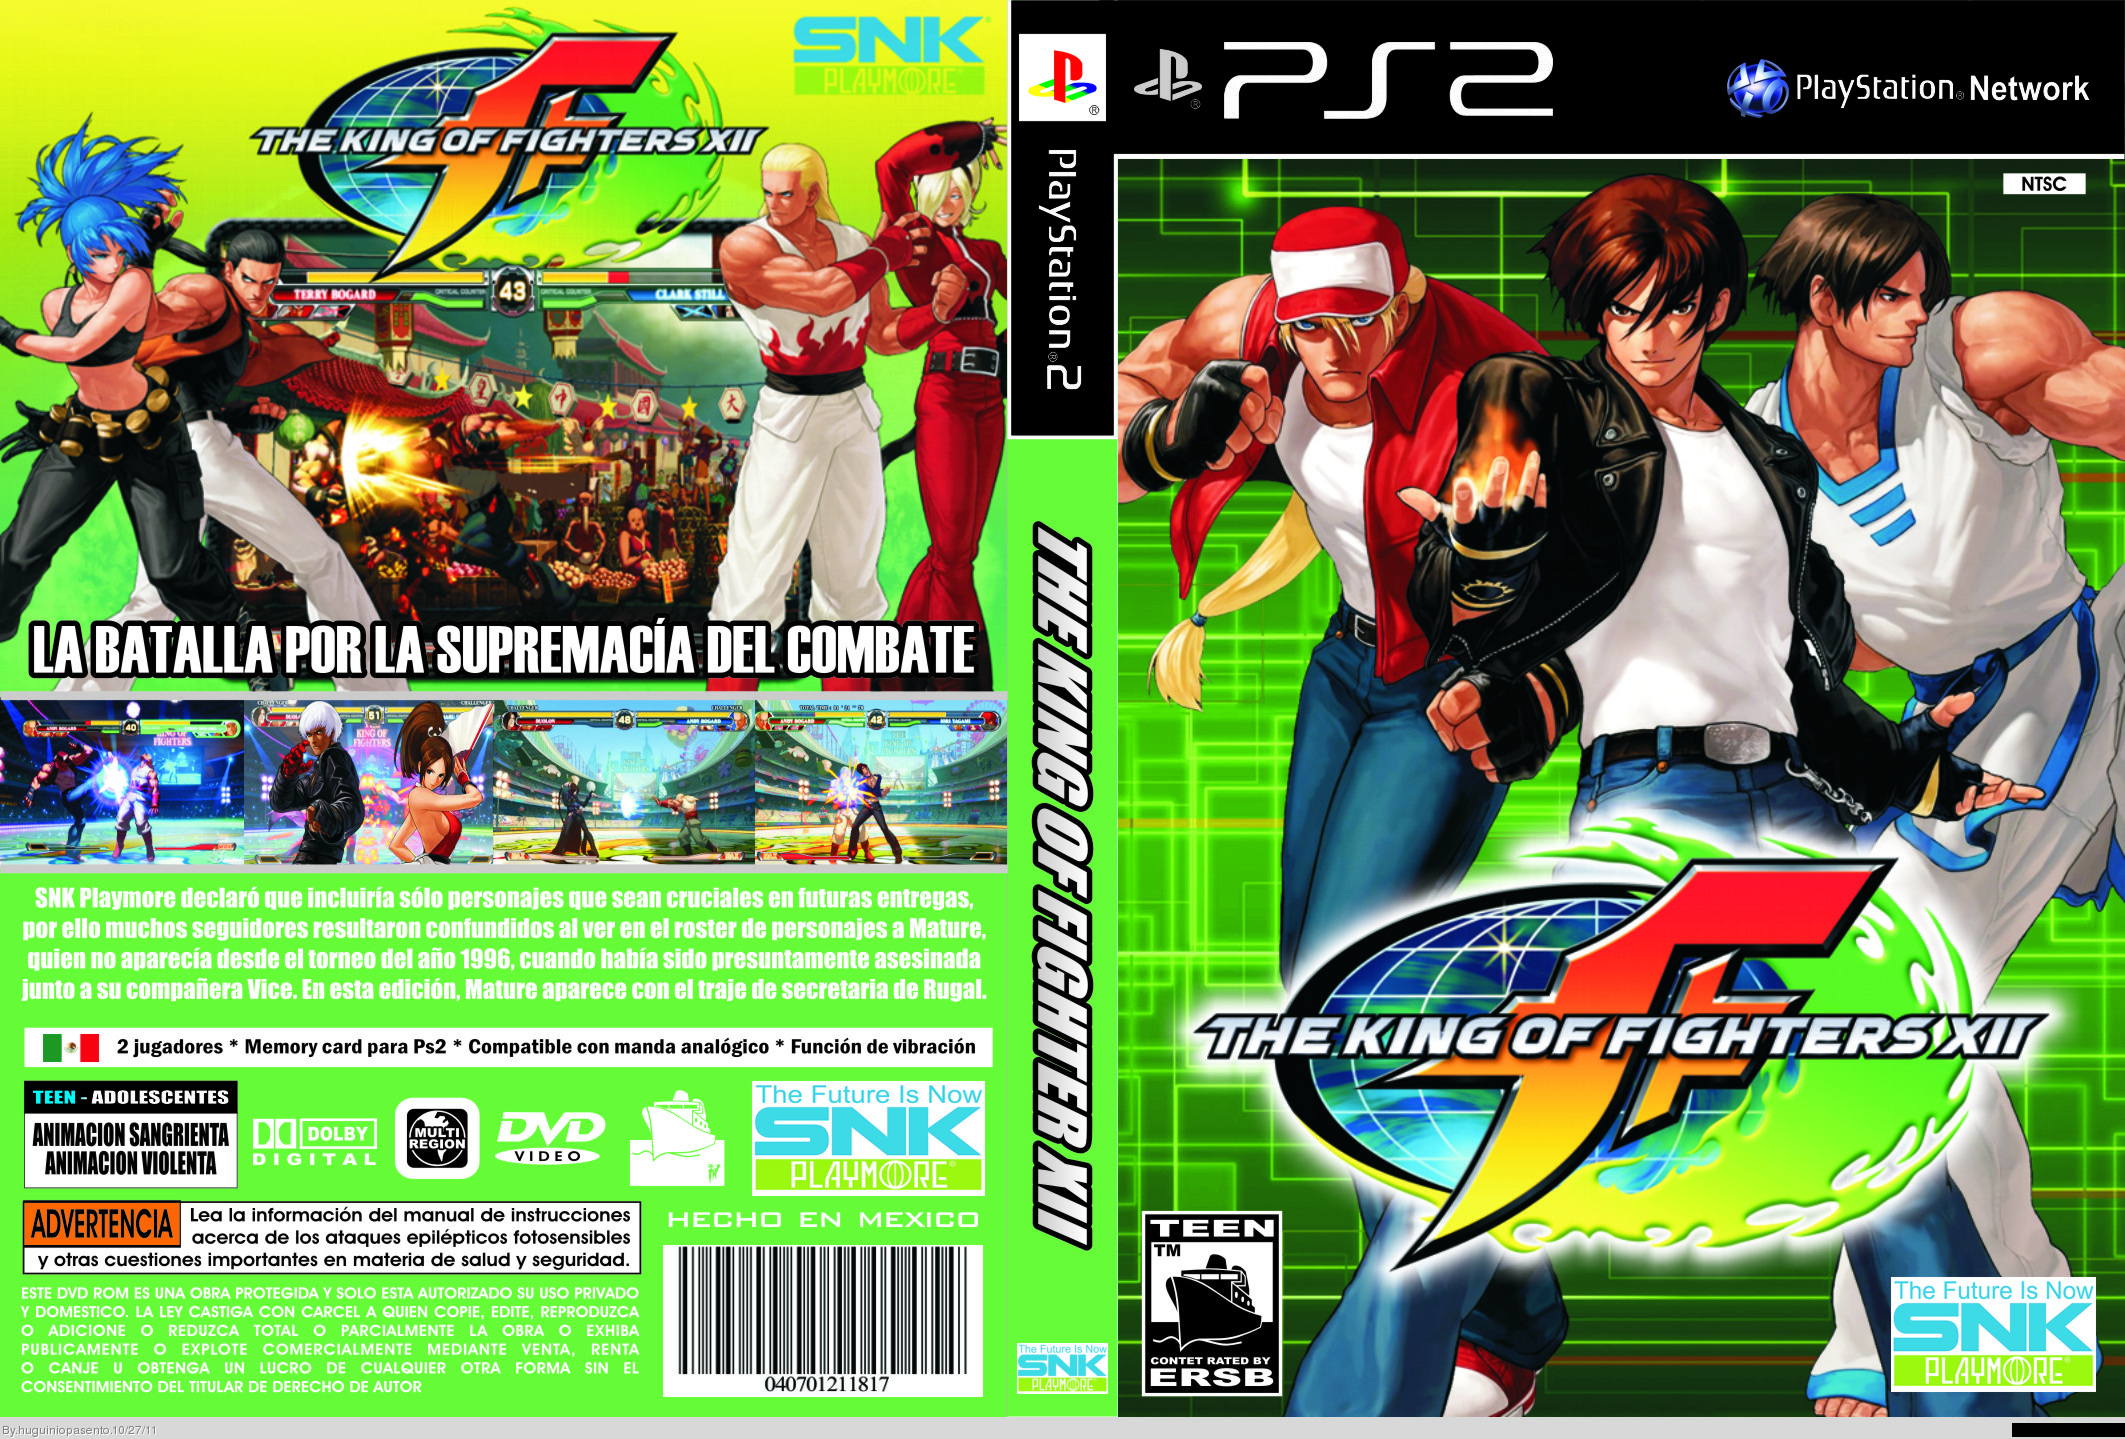 The King of Fighters XII box cover